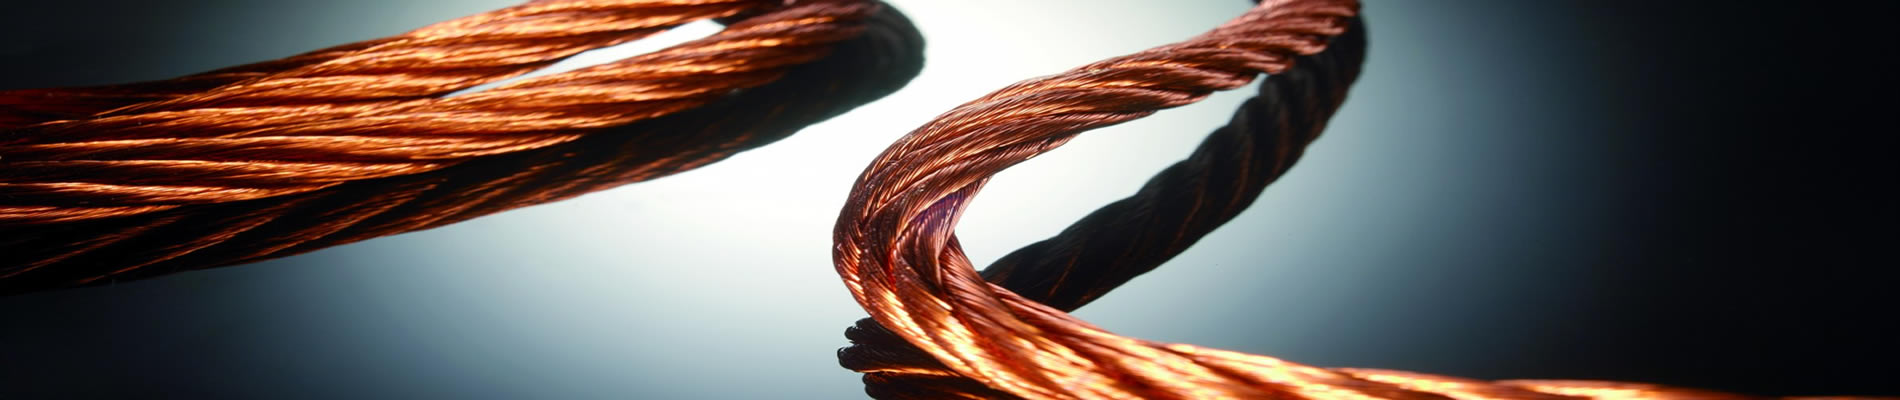 Bunched Stranded Copper Conductors